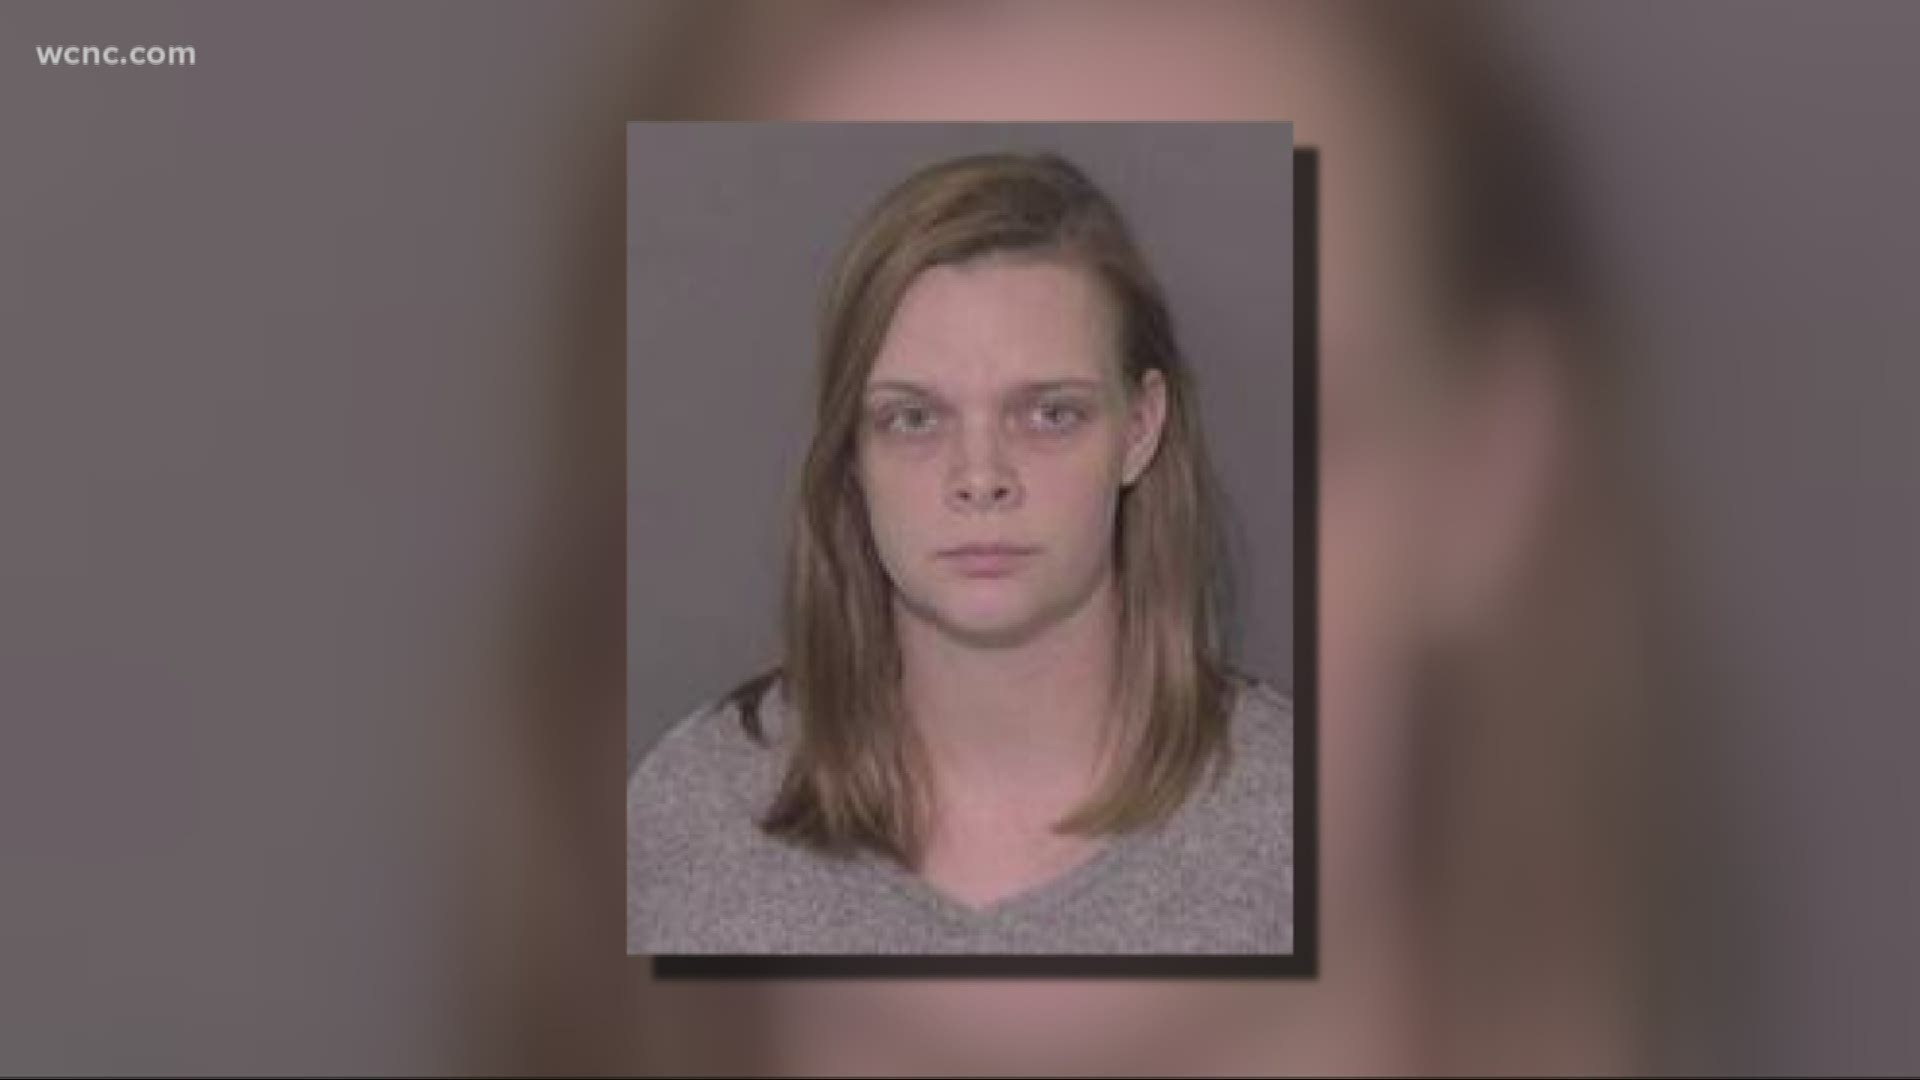 Police say 27-year-old Krystina Rice gave birth on Sunday morning then moved to kill the infant and hide the body.